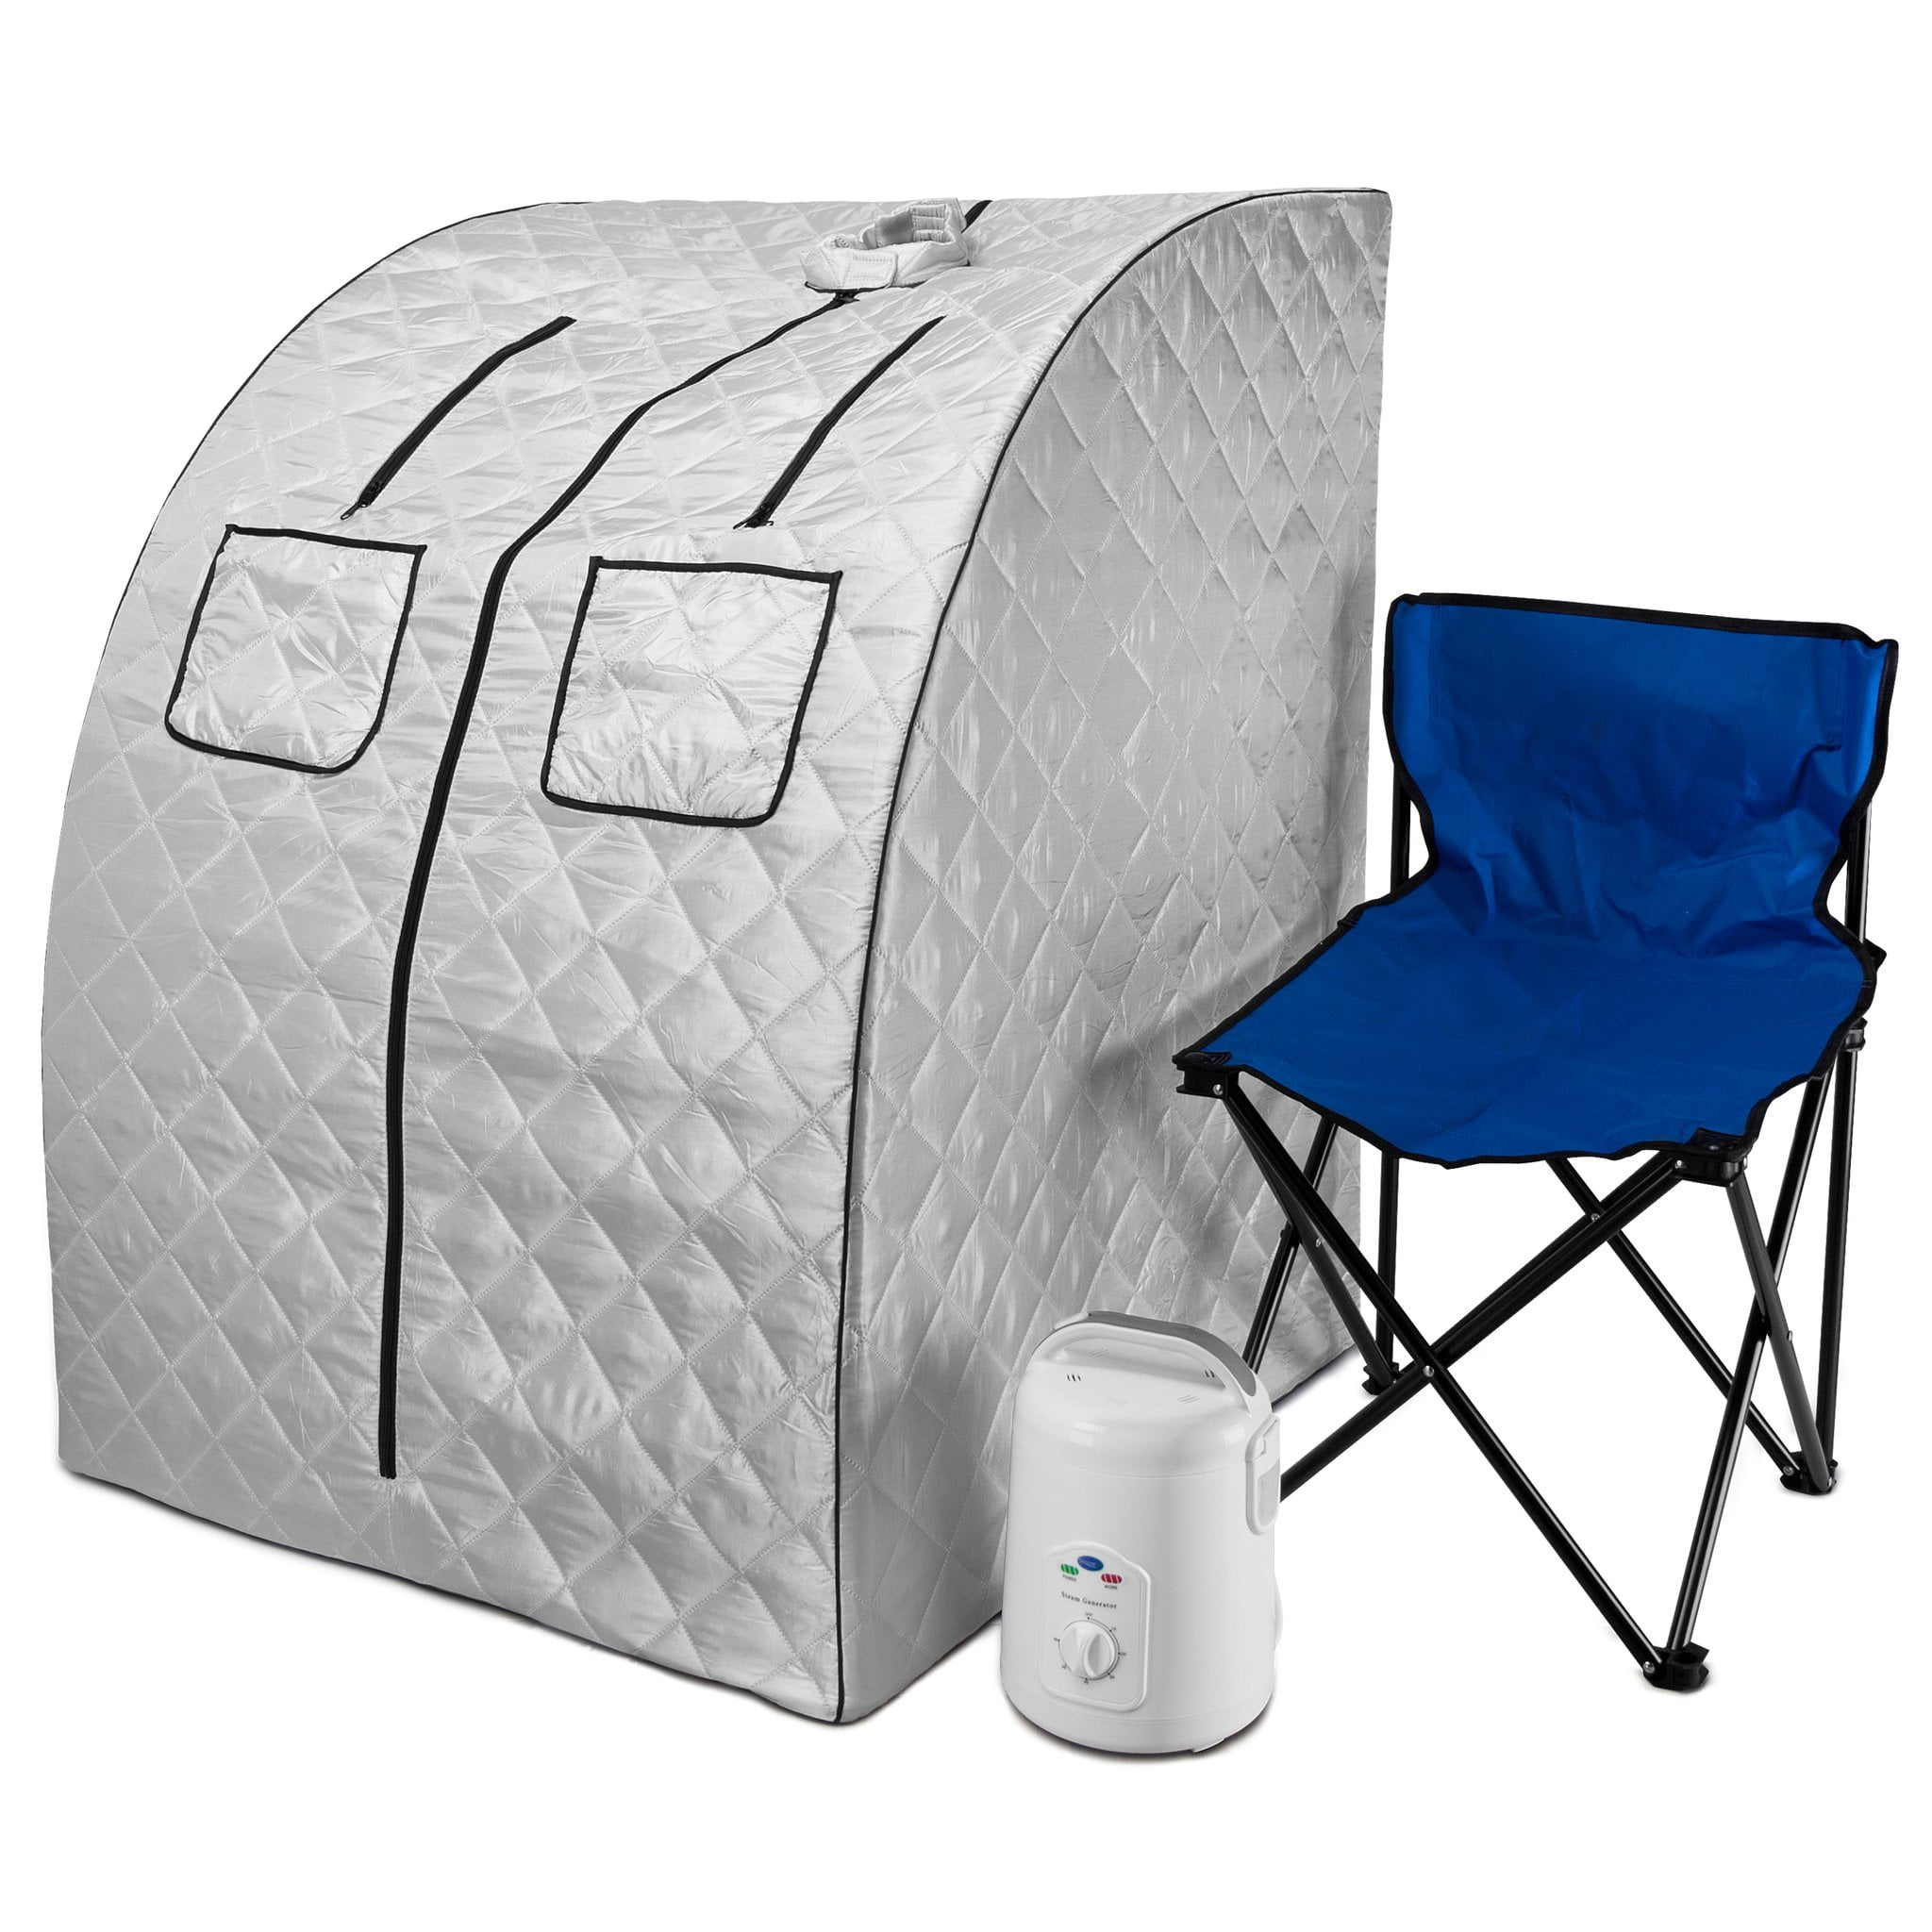 #3 Jarchii Home Spa Steam Sauna 2L Home Personal Spa Steam Sauna Tent With Tent Tube Contorller Portable Tent Large Room Suitable for Crowds In Different Weight